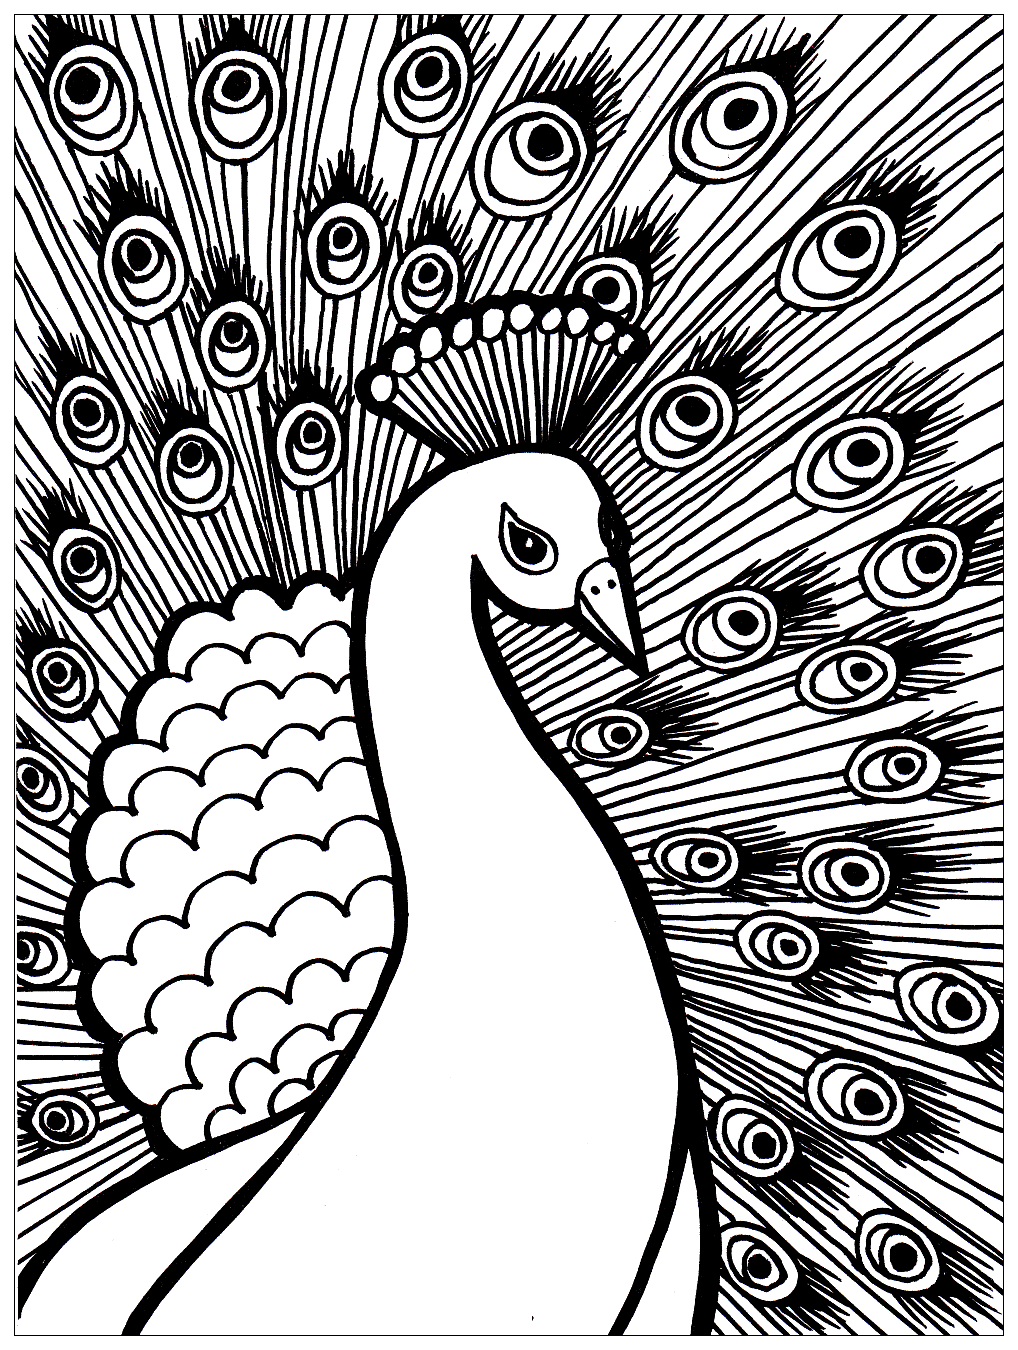 Magnificient peacock to print and color